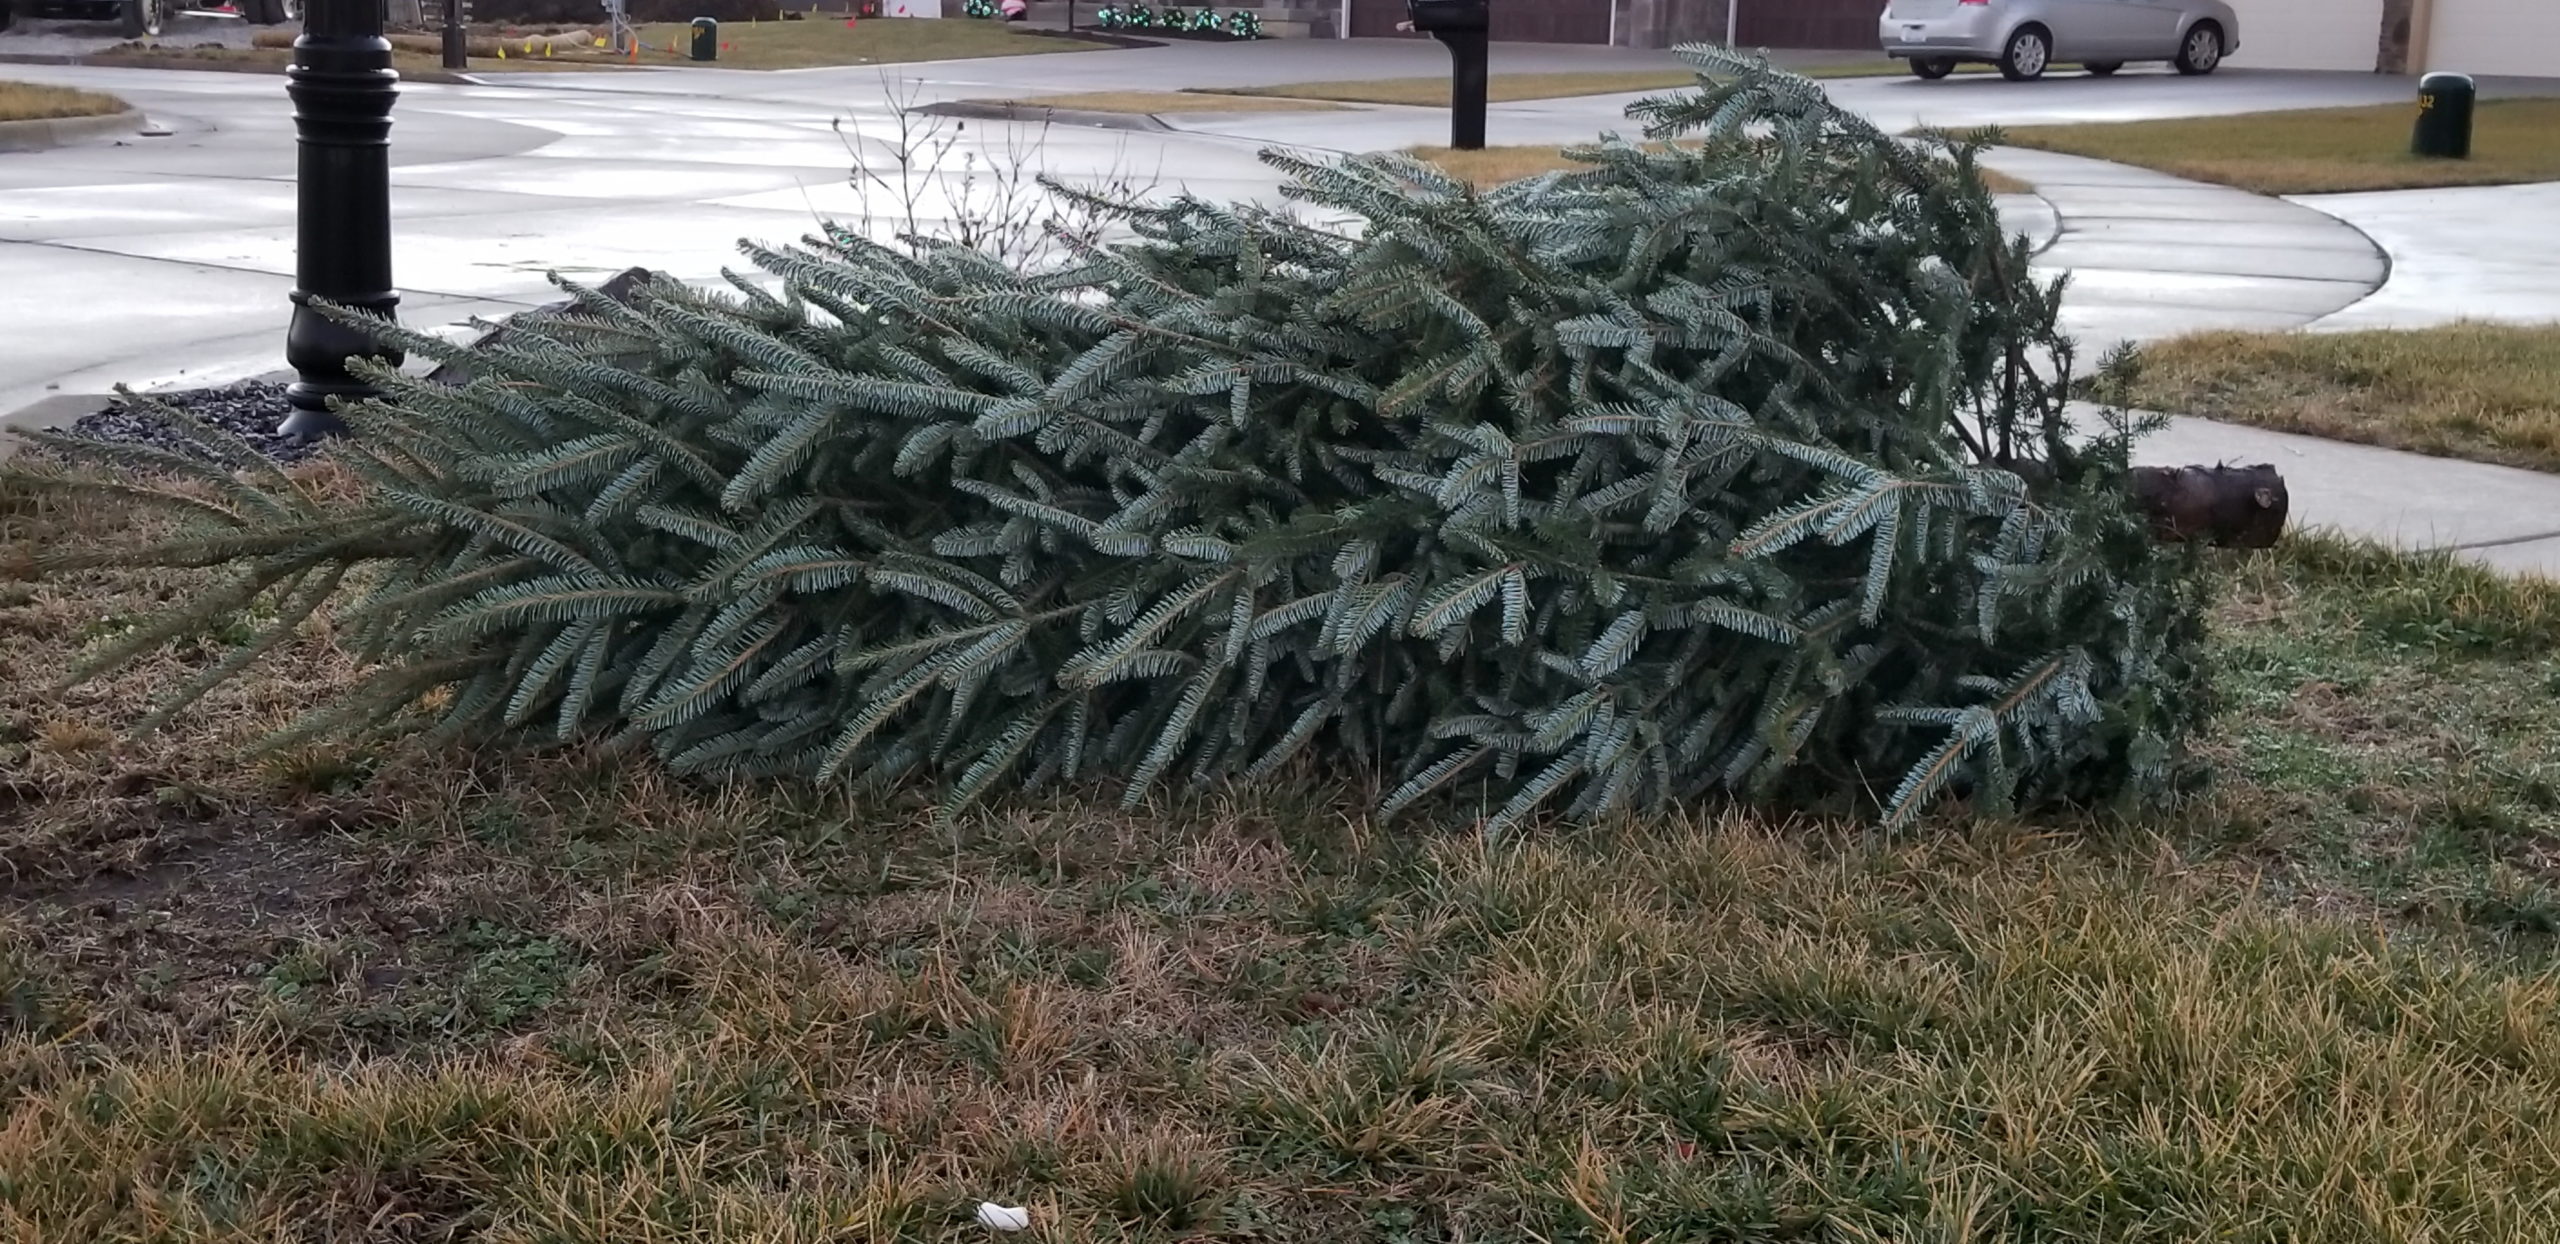 Discarded Christmas tree